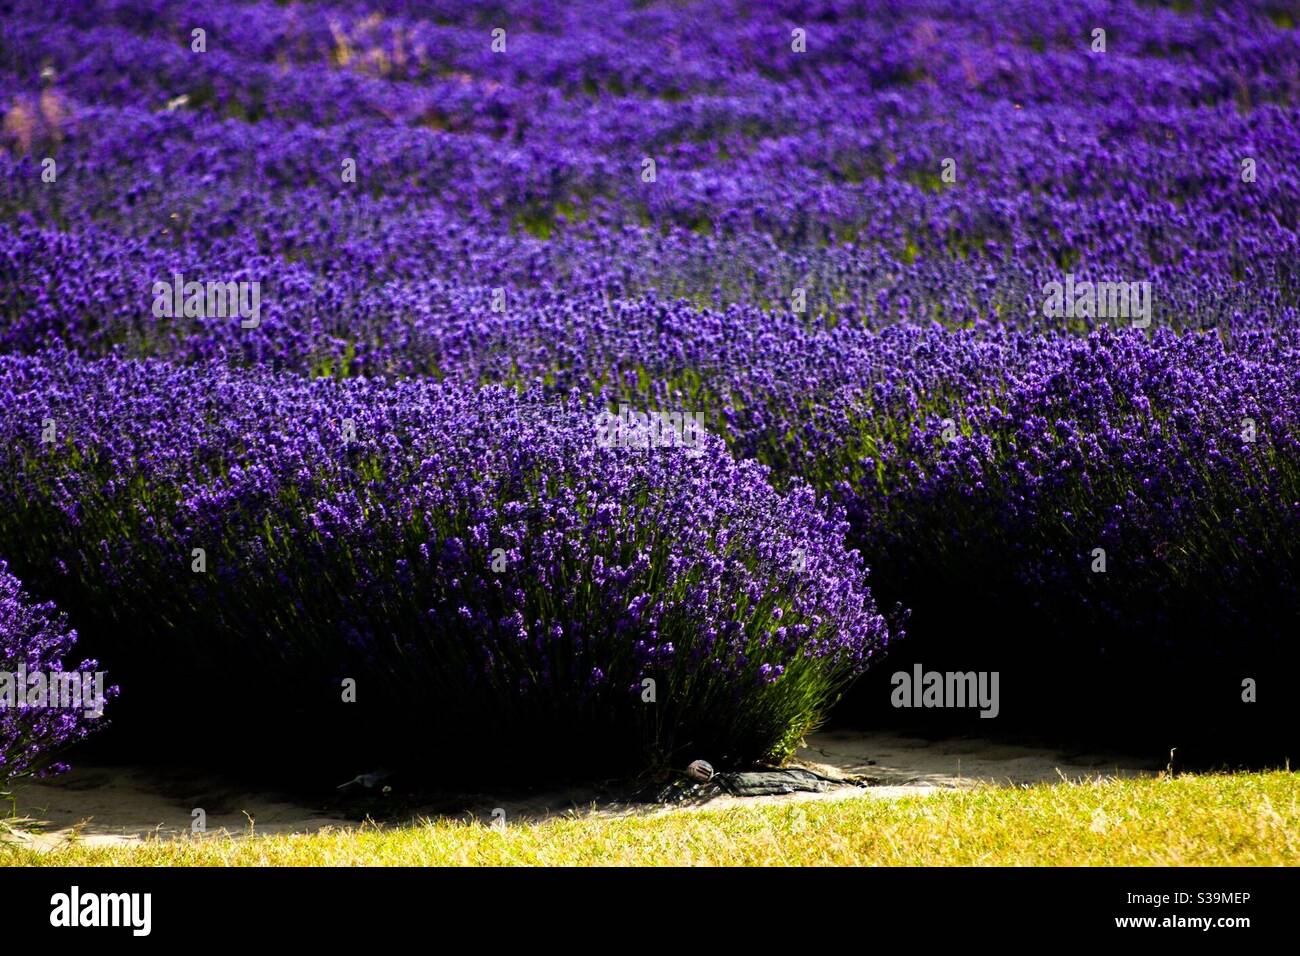 Rows of flowering lavender Stock Photo